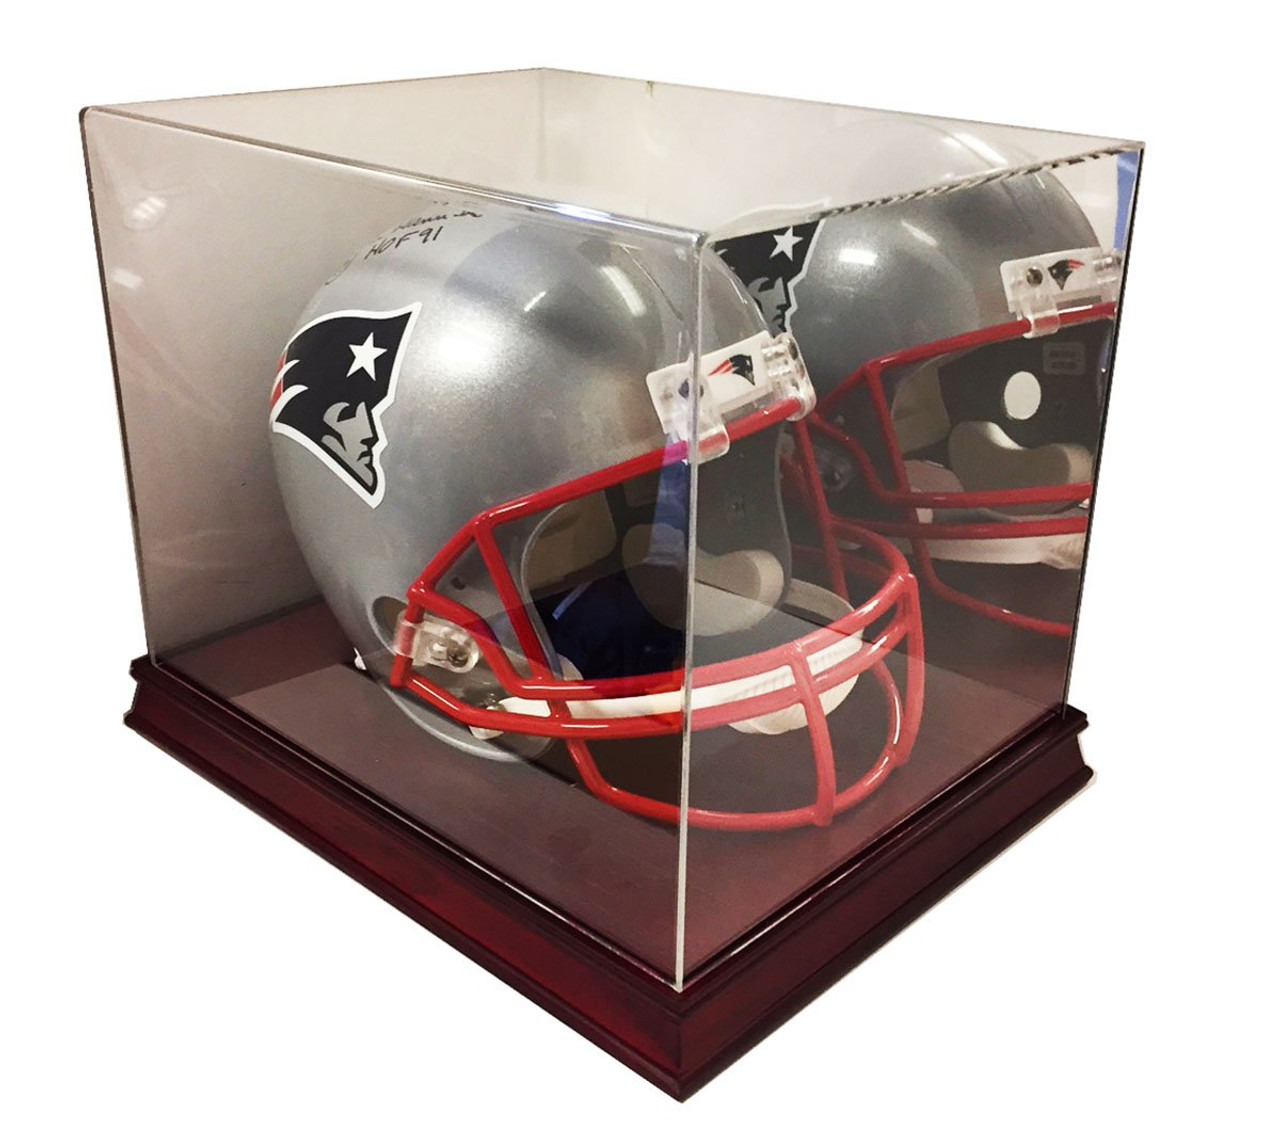 Executive Full Size Football Helmet Display Uv Case W Mirror Cherry Wood Columbia Hobby Free Shipping On Orders Over 200 Continental Us Only